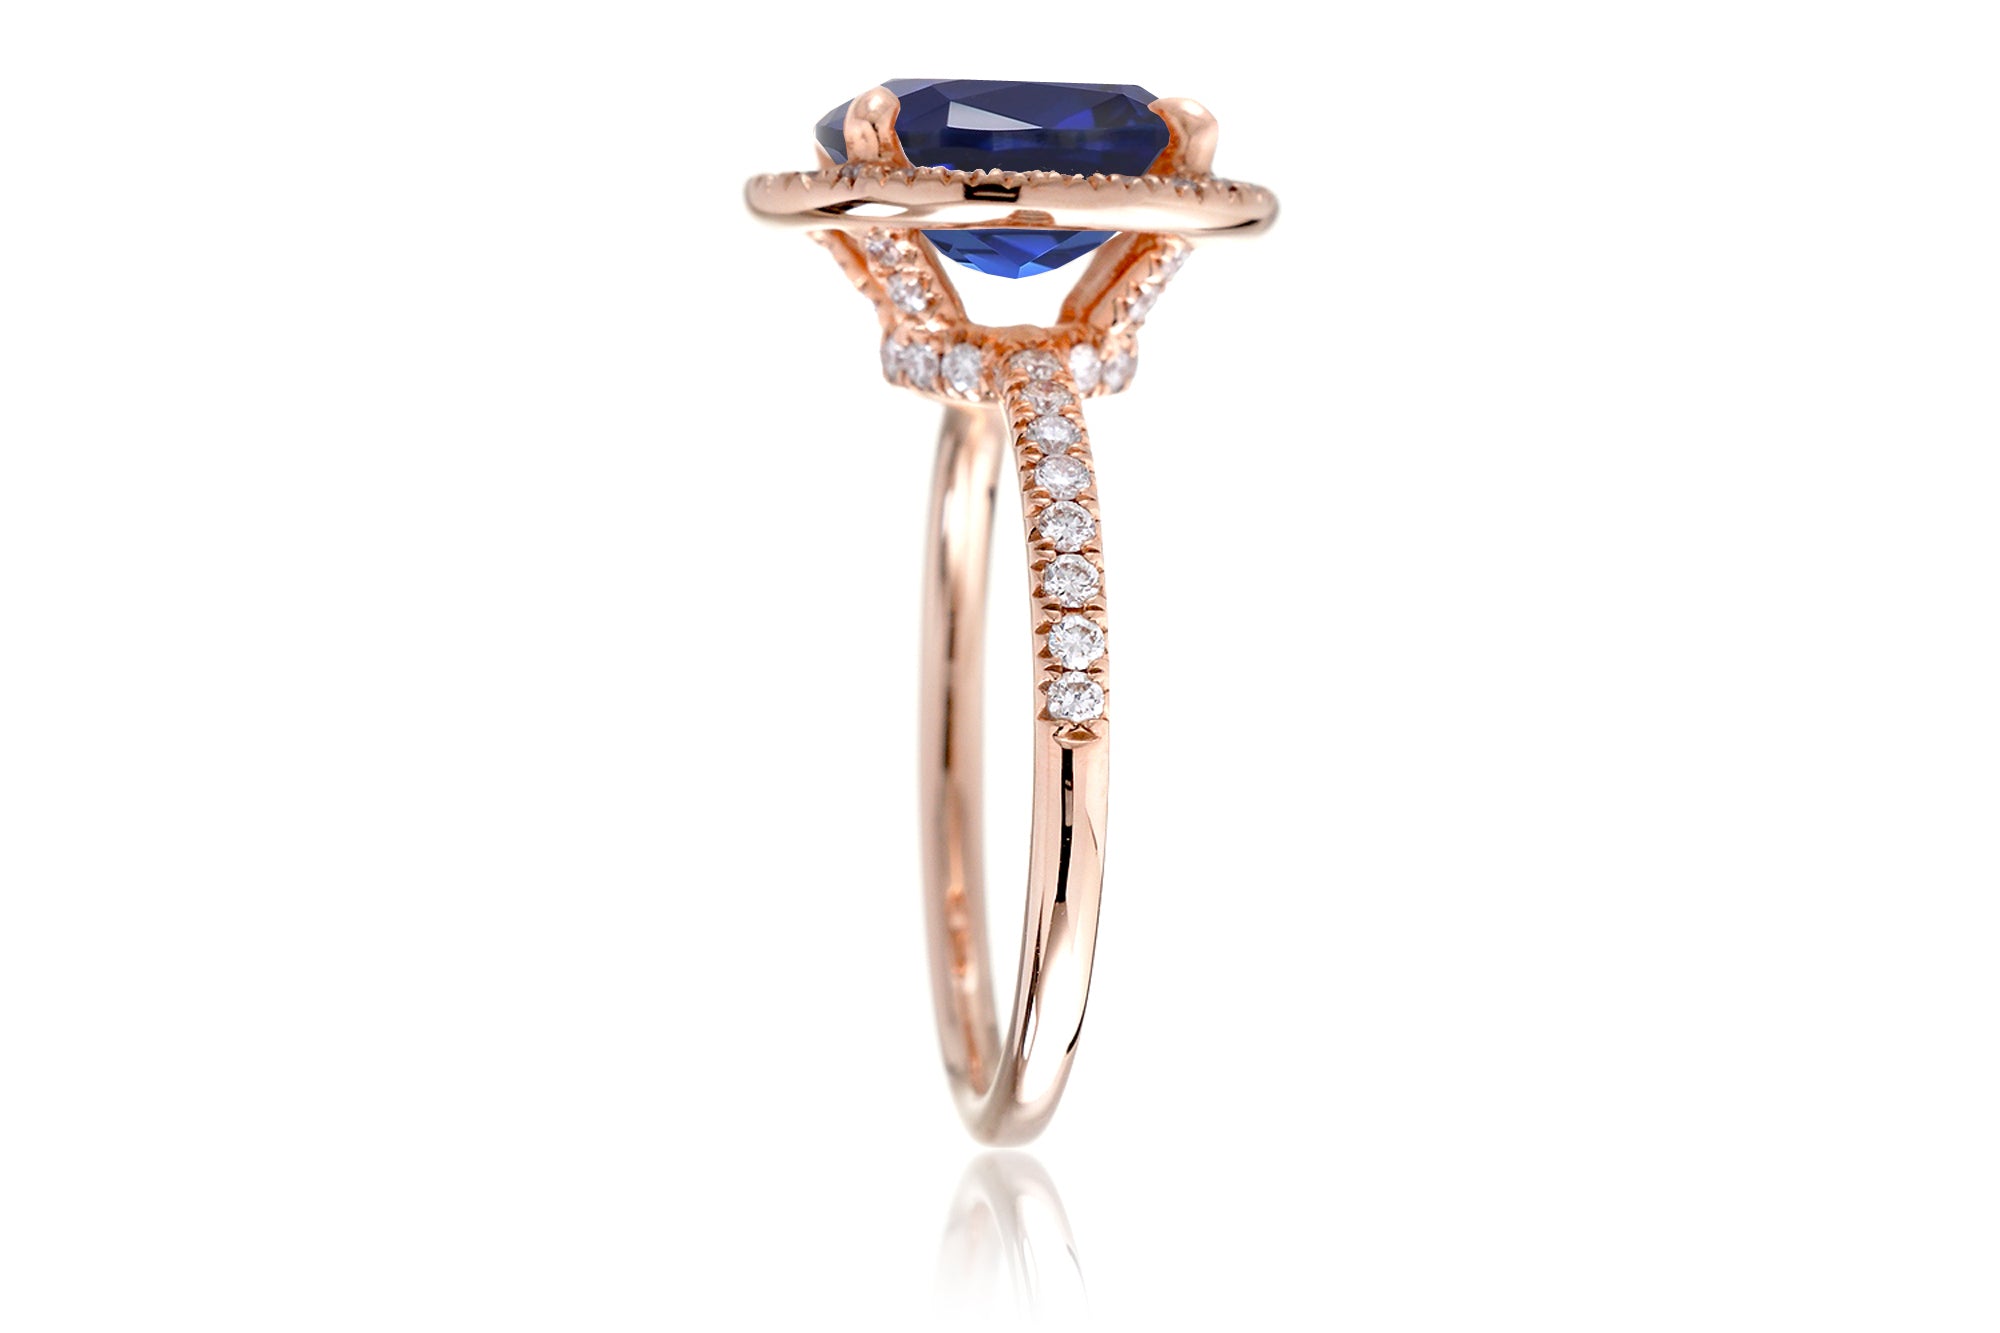 Oval sapphire diamond halo and band wedding rings rose gold